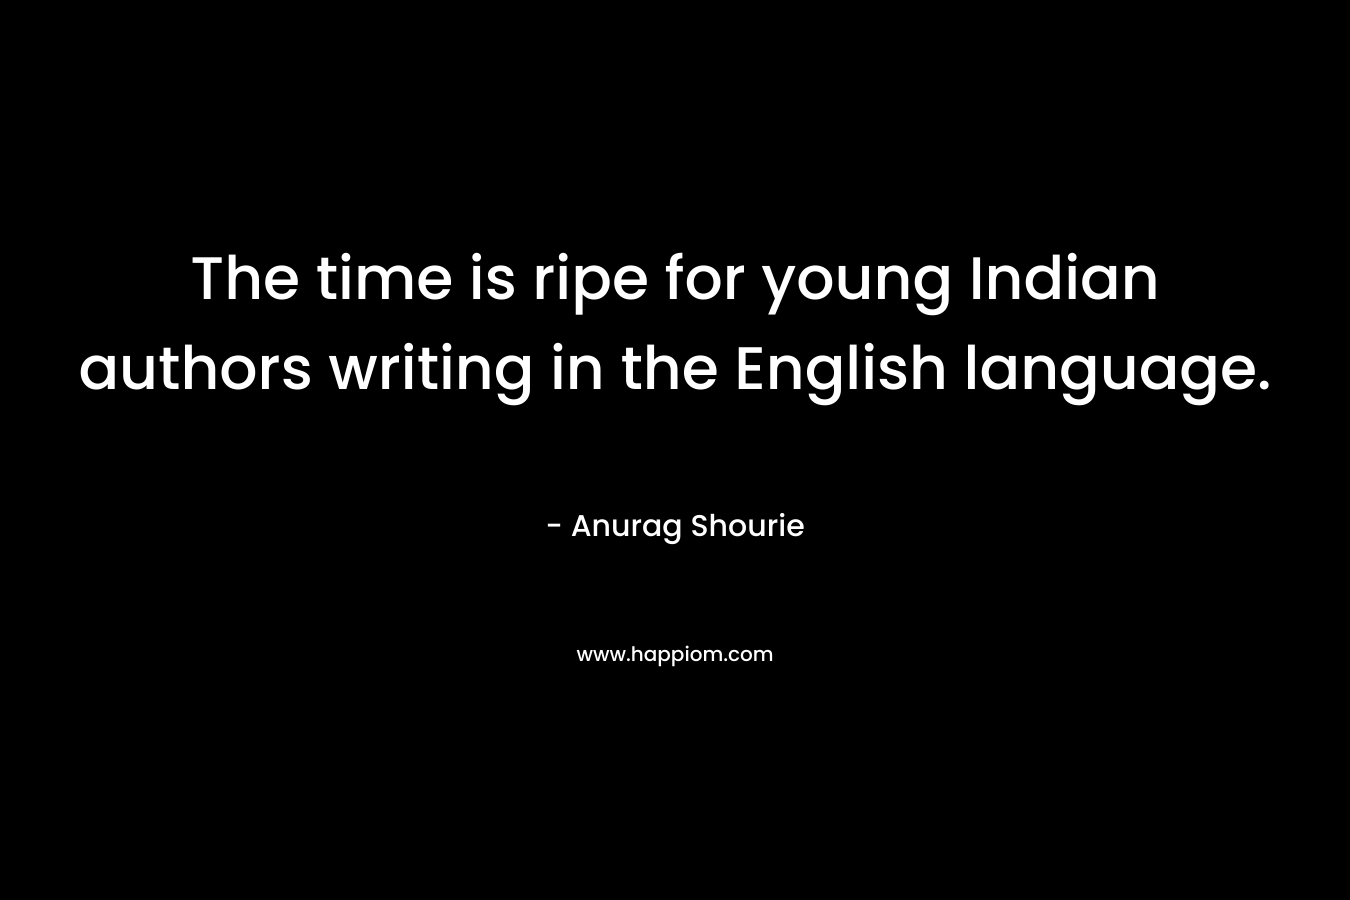 The time is ripe for young Indian authors writing in the English language. – Anurag Shourie